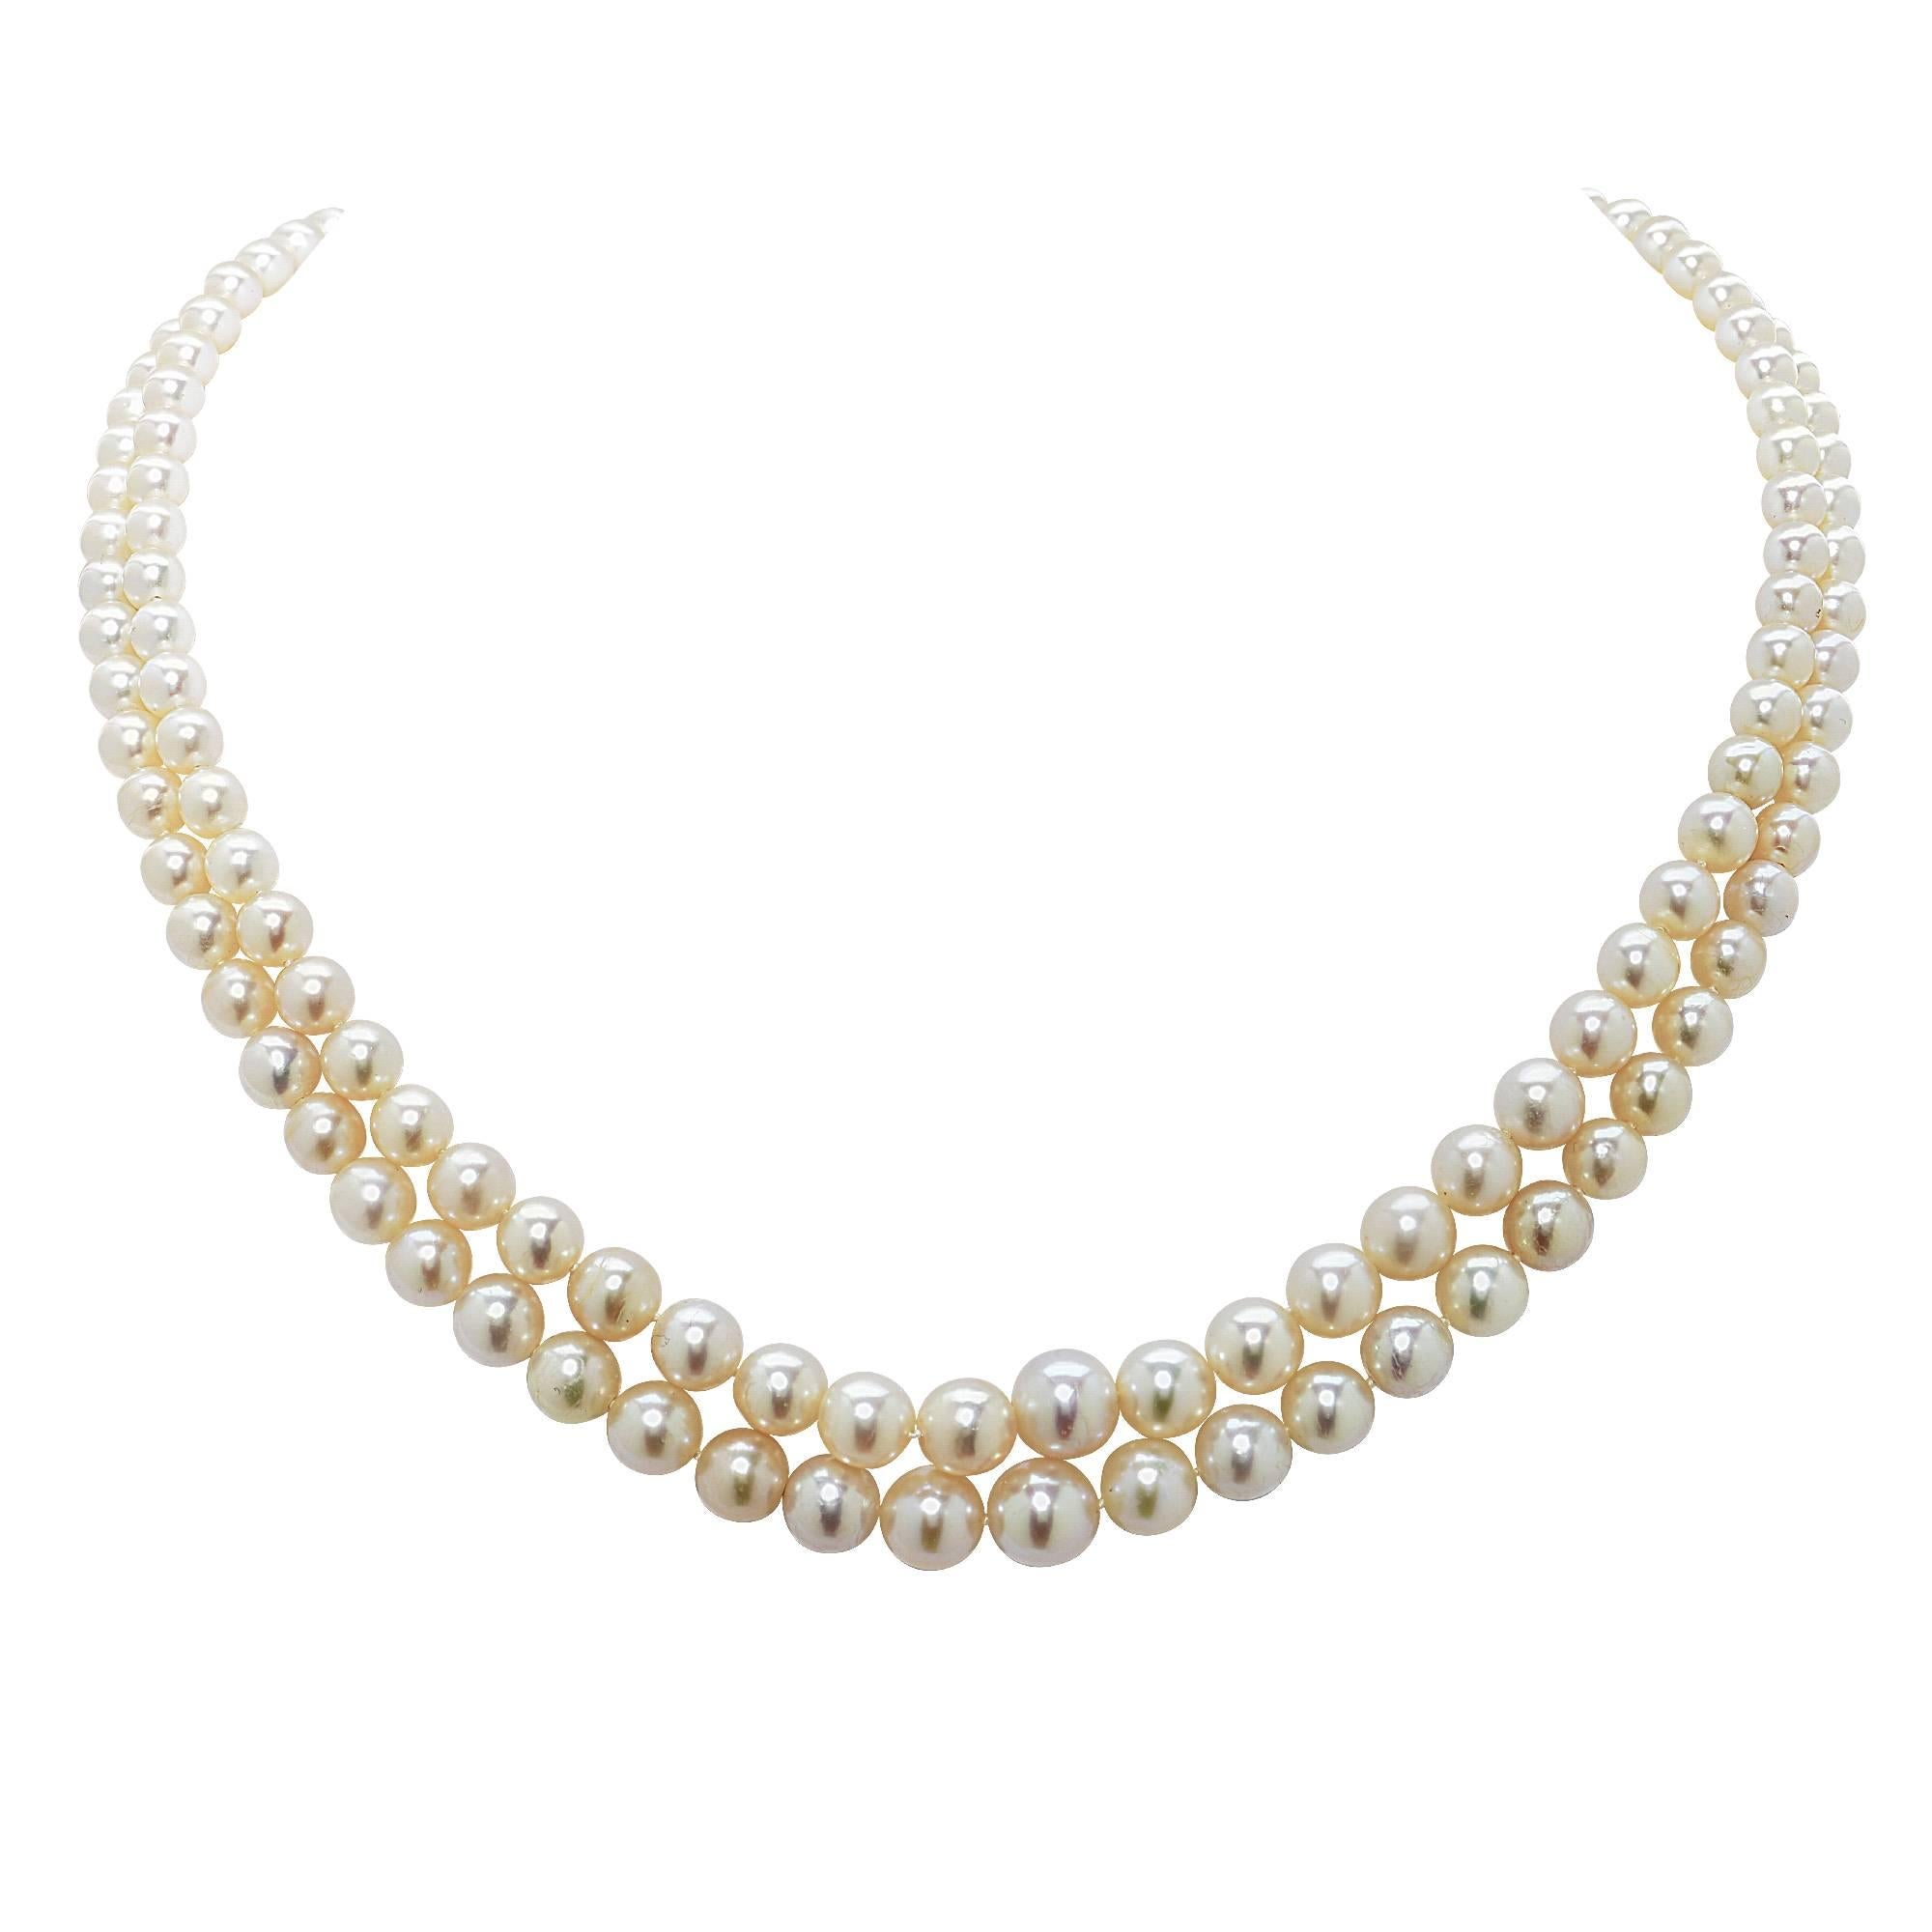 Beautiful Cartier natural pearl necklace with 145 pearls ranging from 3.68mm to 7.64mm. The pearl strands accented by a natural jade clasp signed CARTIER. 

This pearl and jade necklace is accompanied by a retail appraisal performed by a GIA